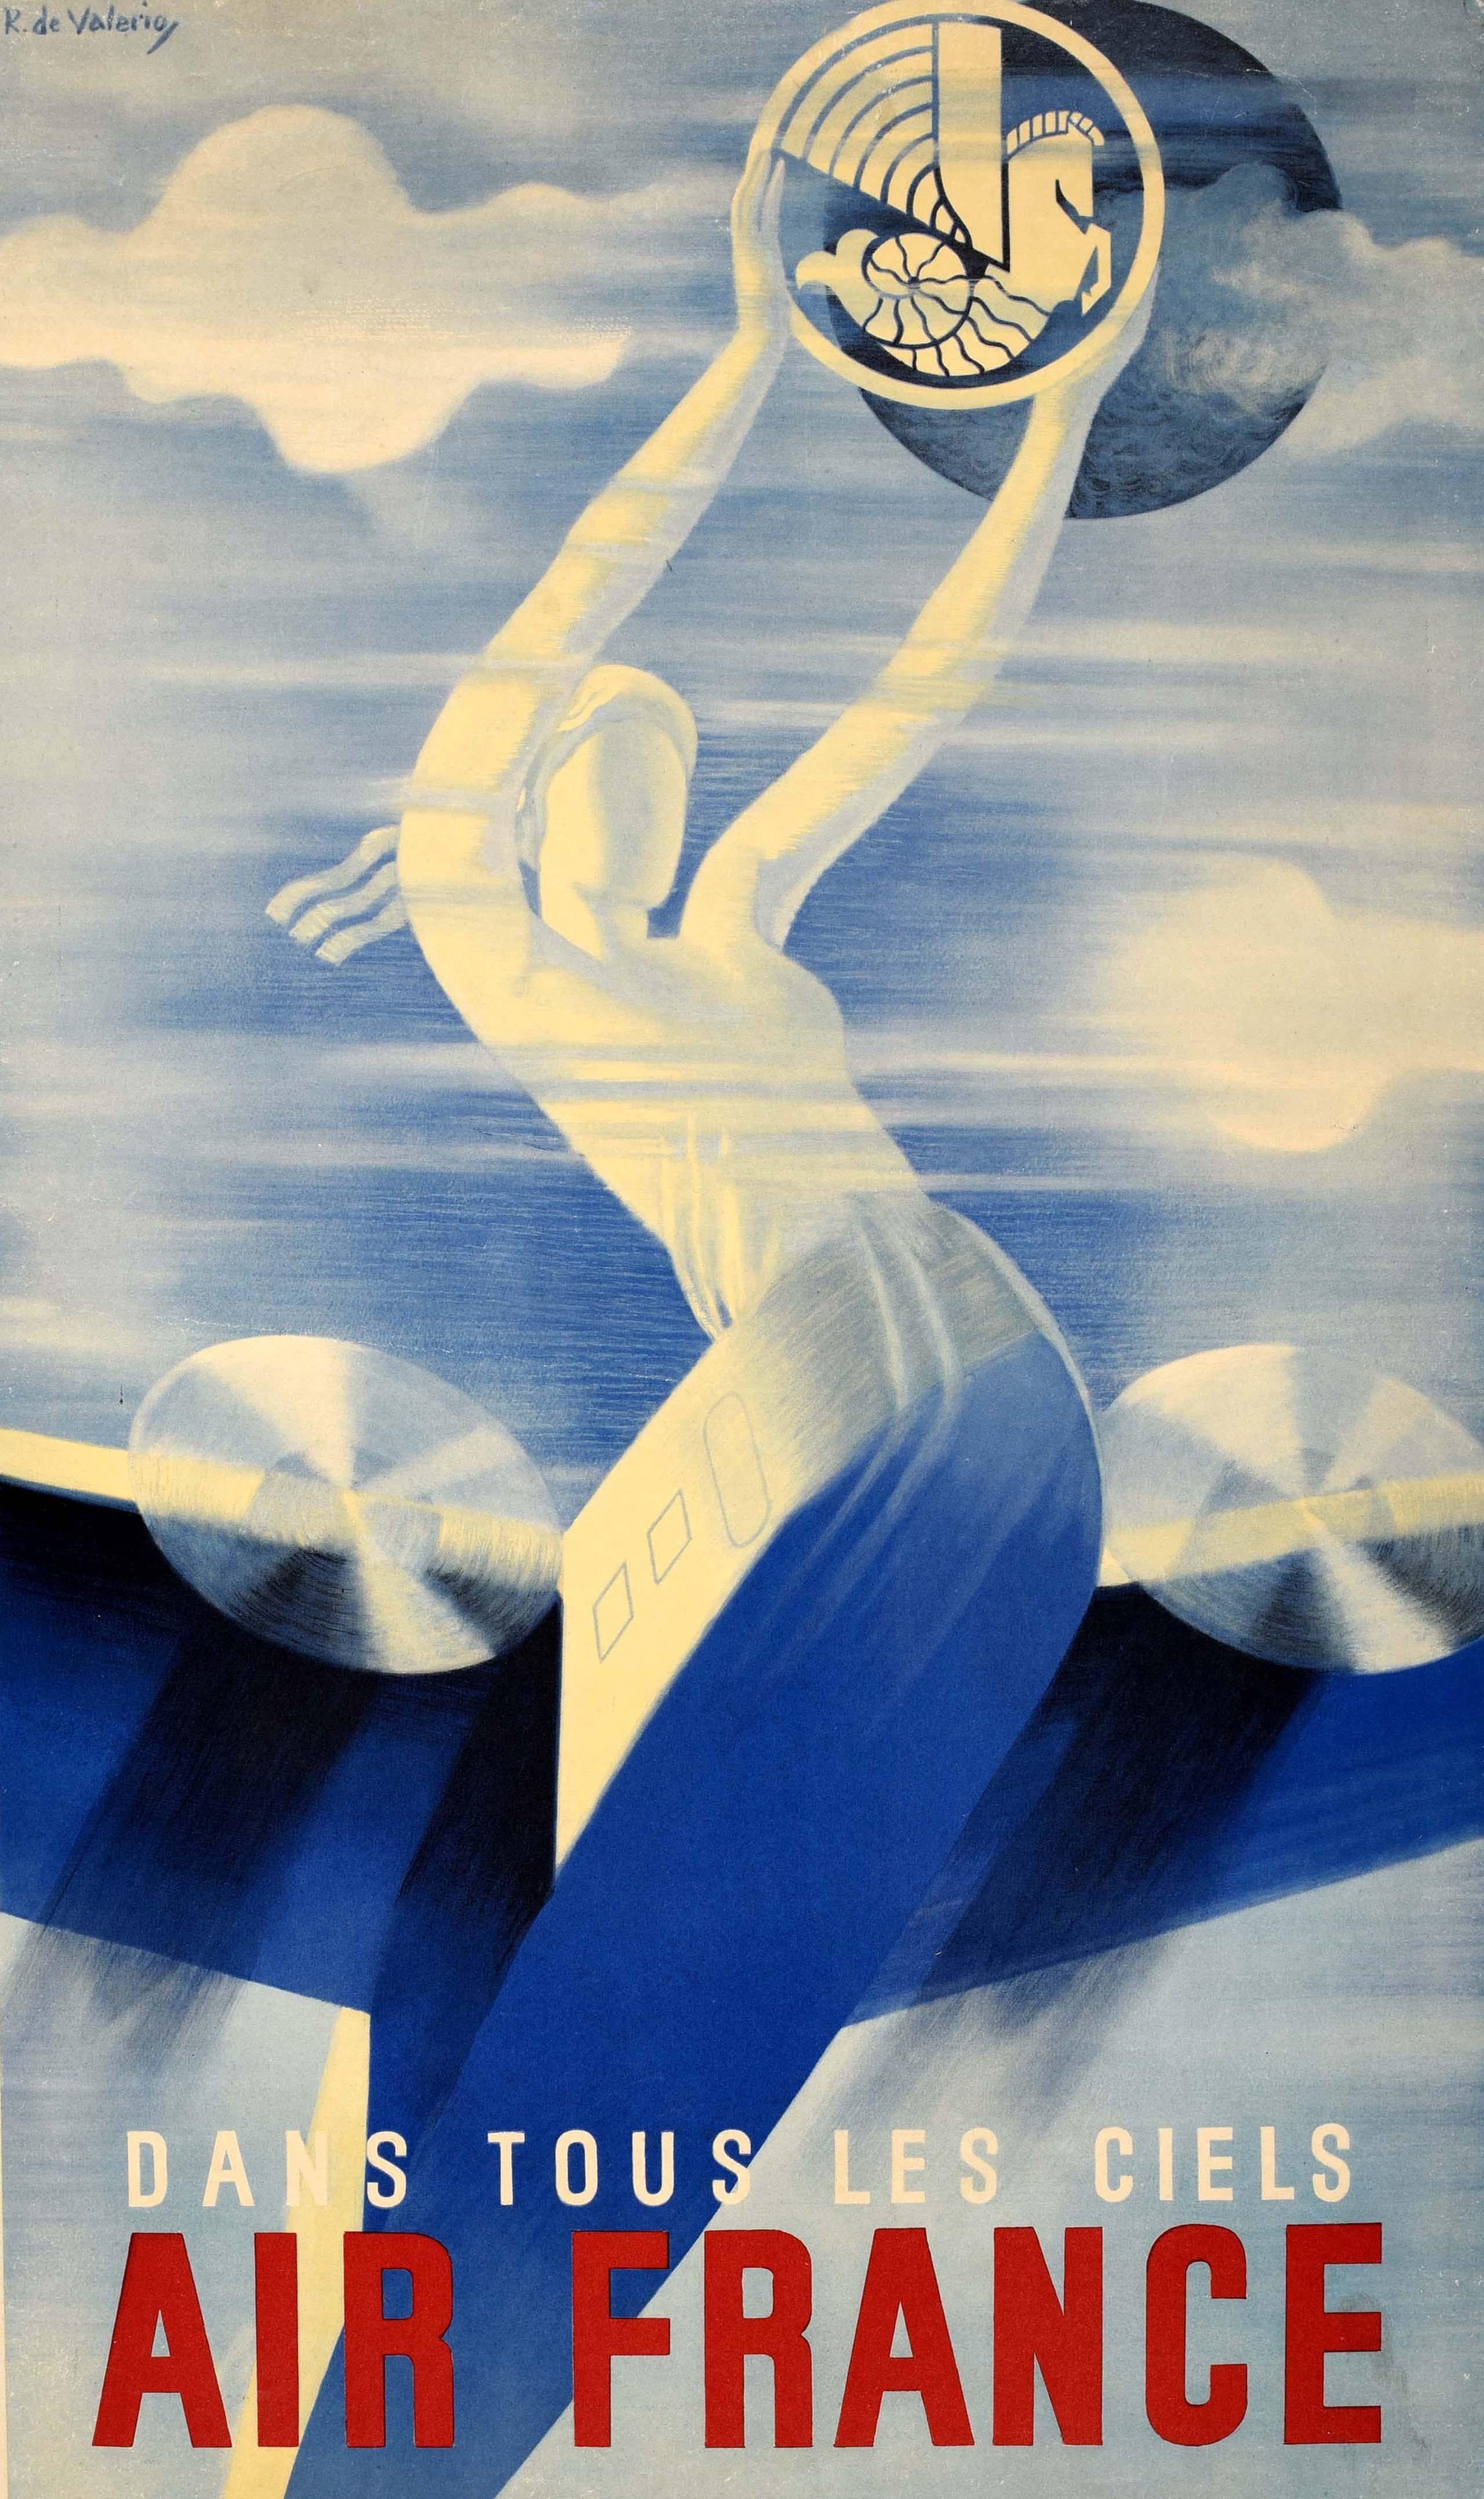 Original vintage travel poster - Dans Tous Les Ciels Air France / In All Skies - featuring a stunning Art Deco design by Roger de Valerio (1886-1951) depicting a propeller plane flying at speed with a lady at the front, like a ship's figurehead,